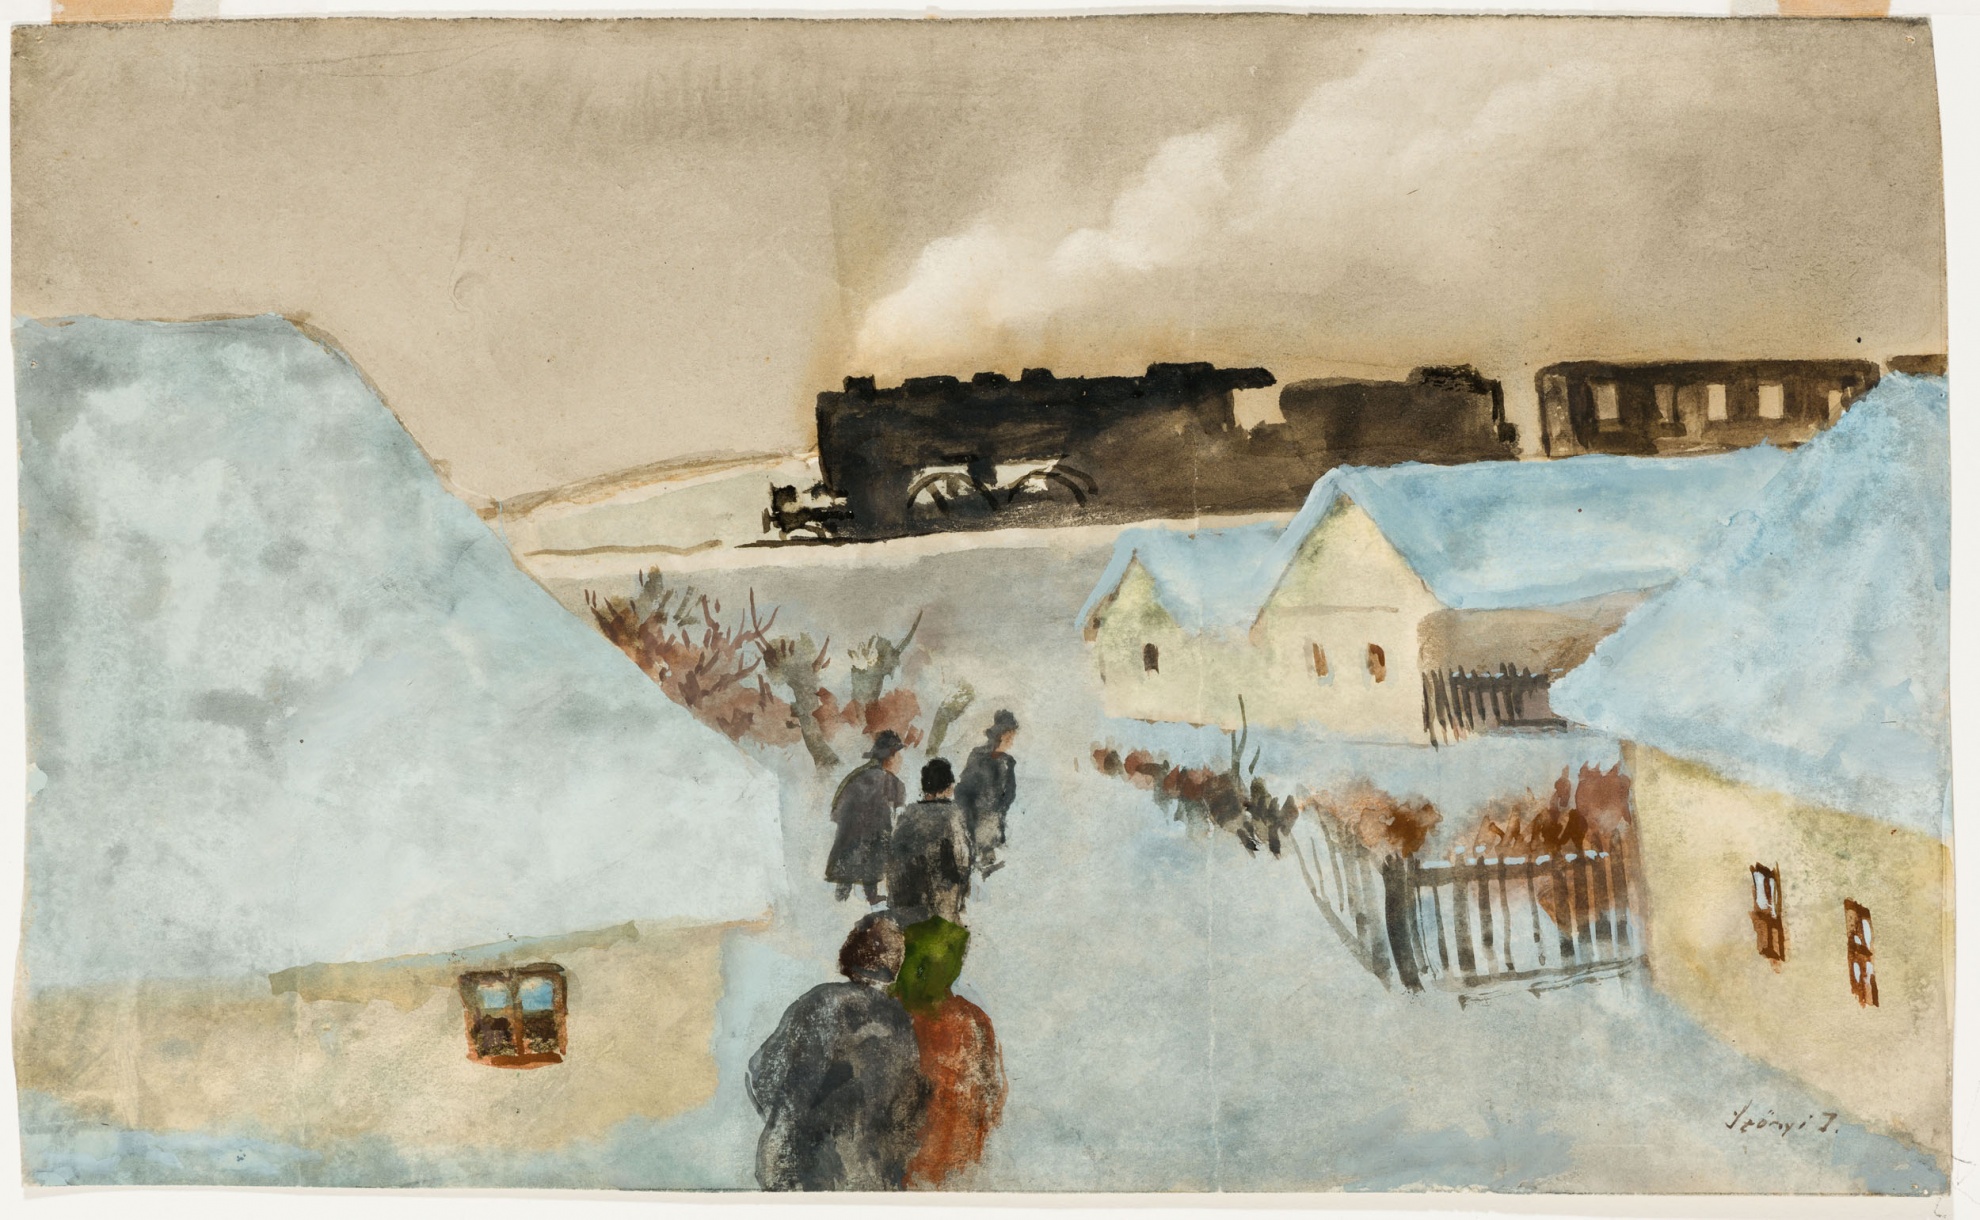 untitled (winter village scene with train)
(The Salgo Trust for Education CC BY-NC-SA)